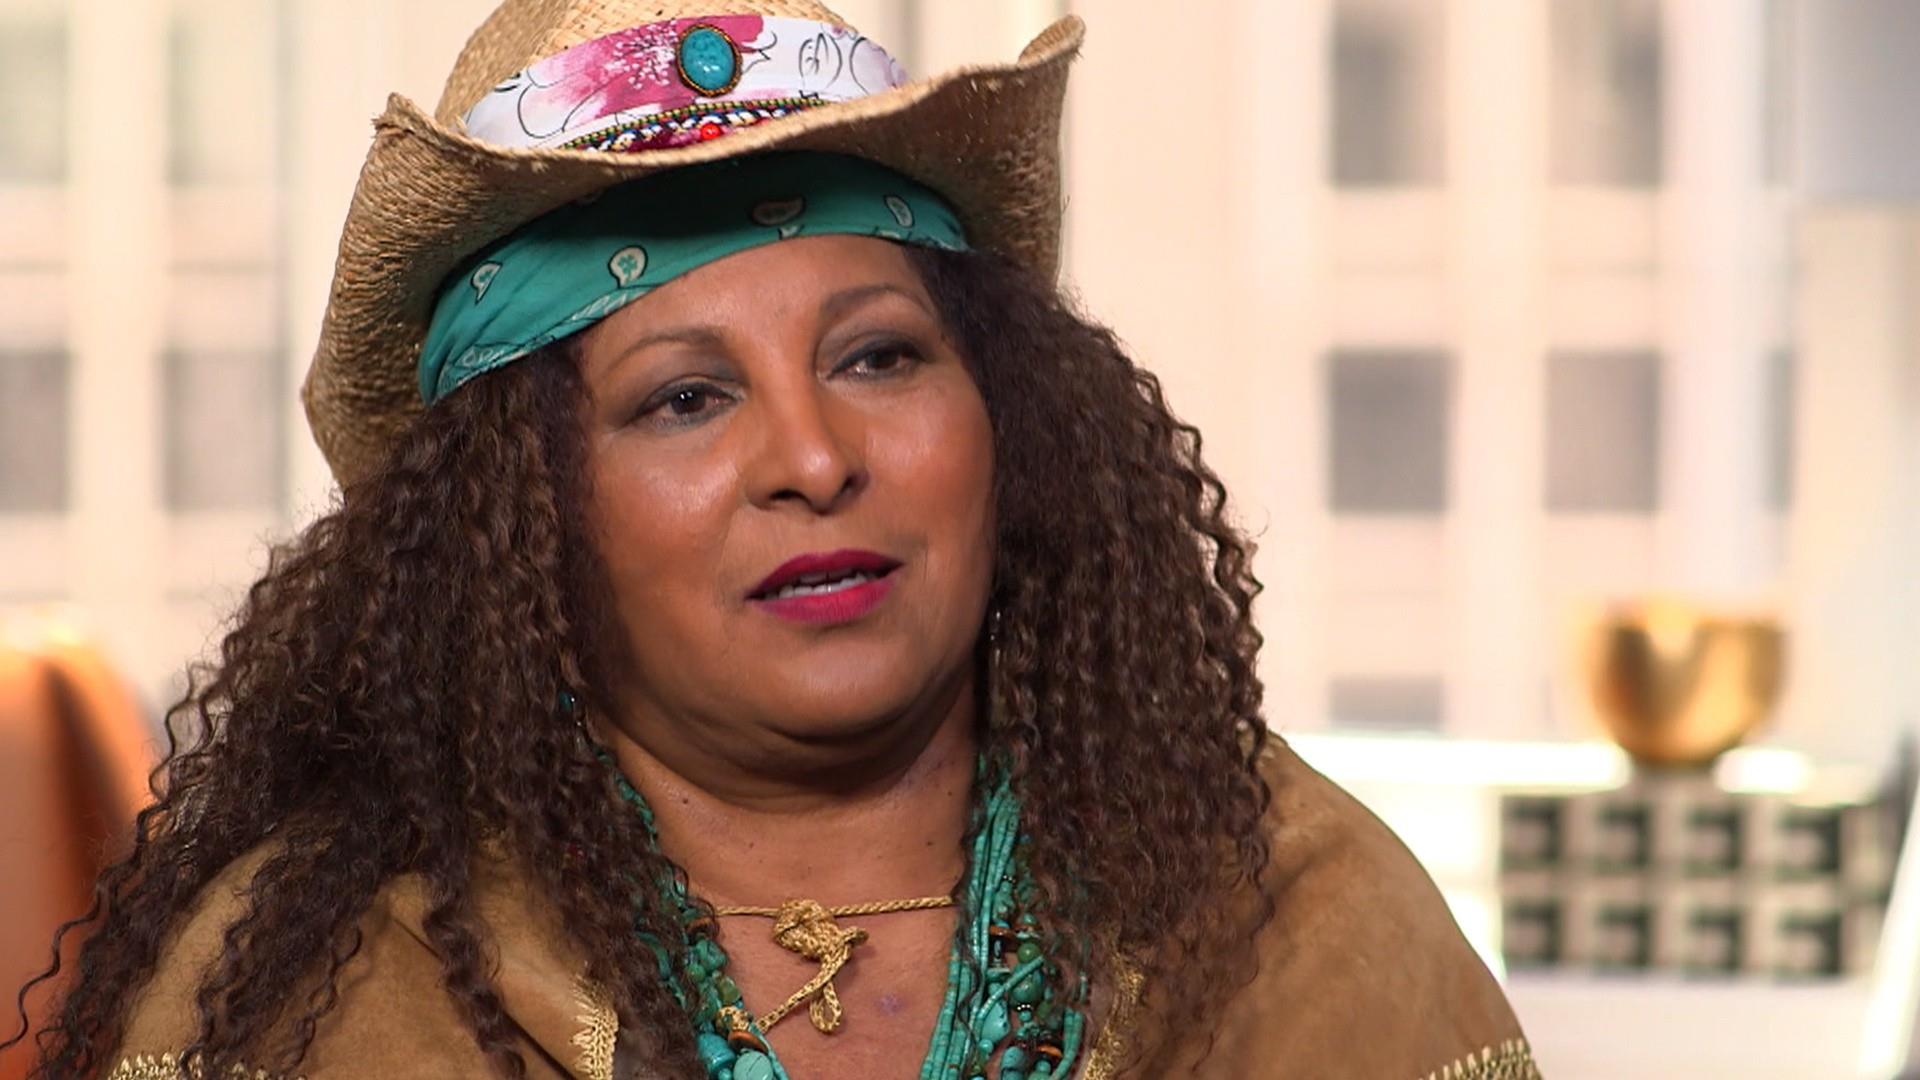 Pam grier on her big break iconic roles and aging